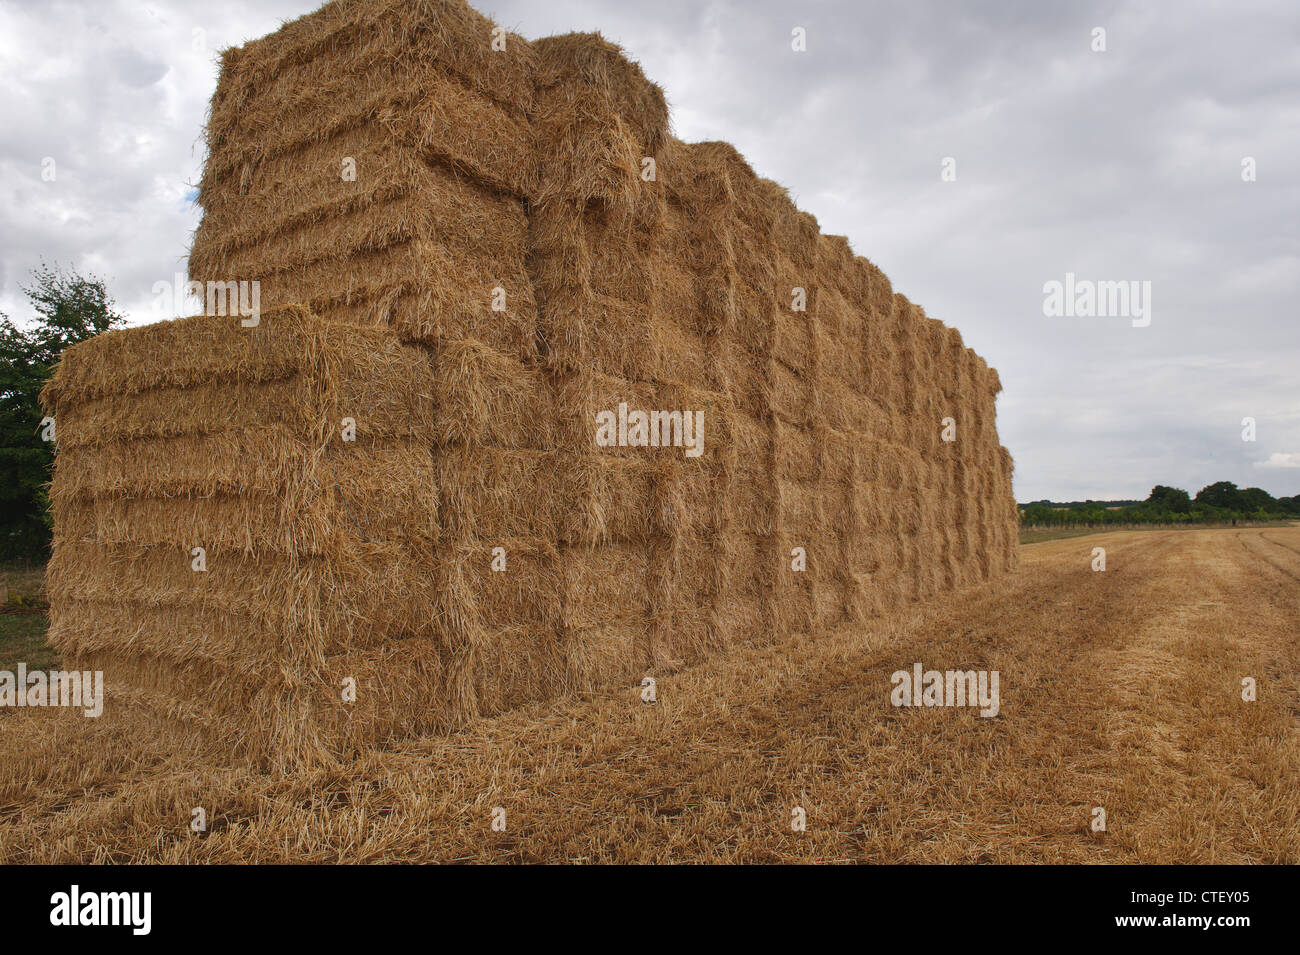 Large haystack in a field Stock Photo